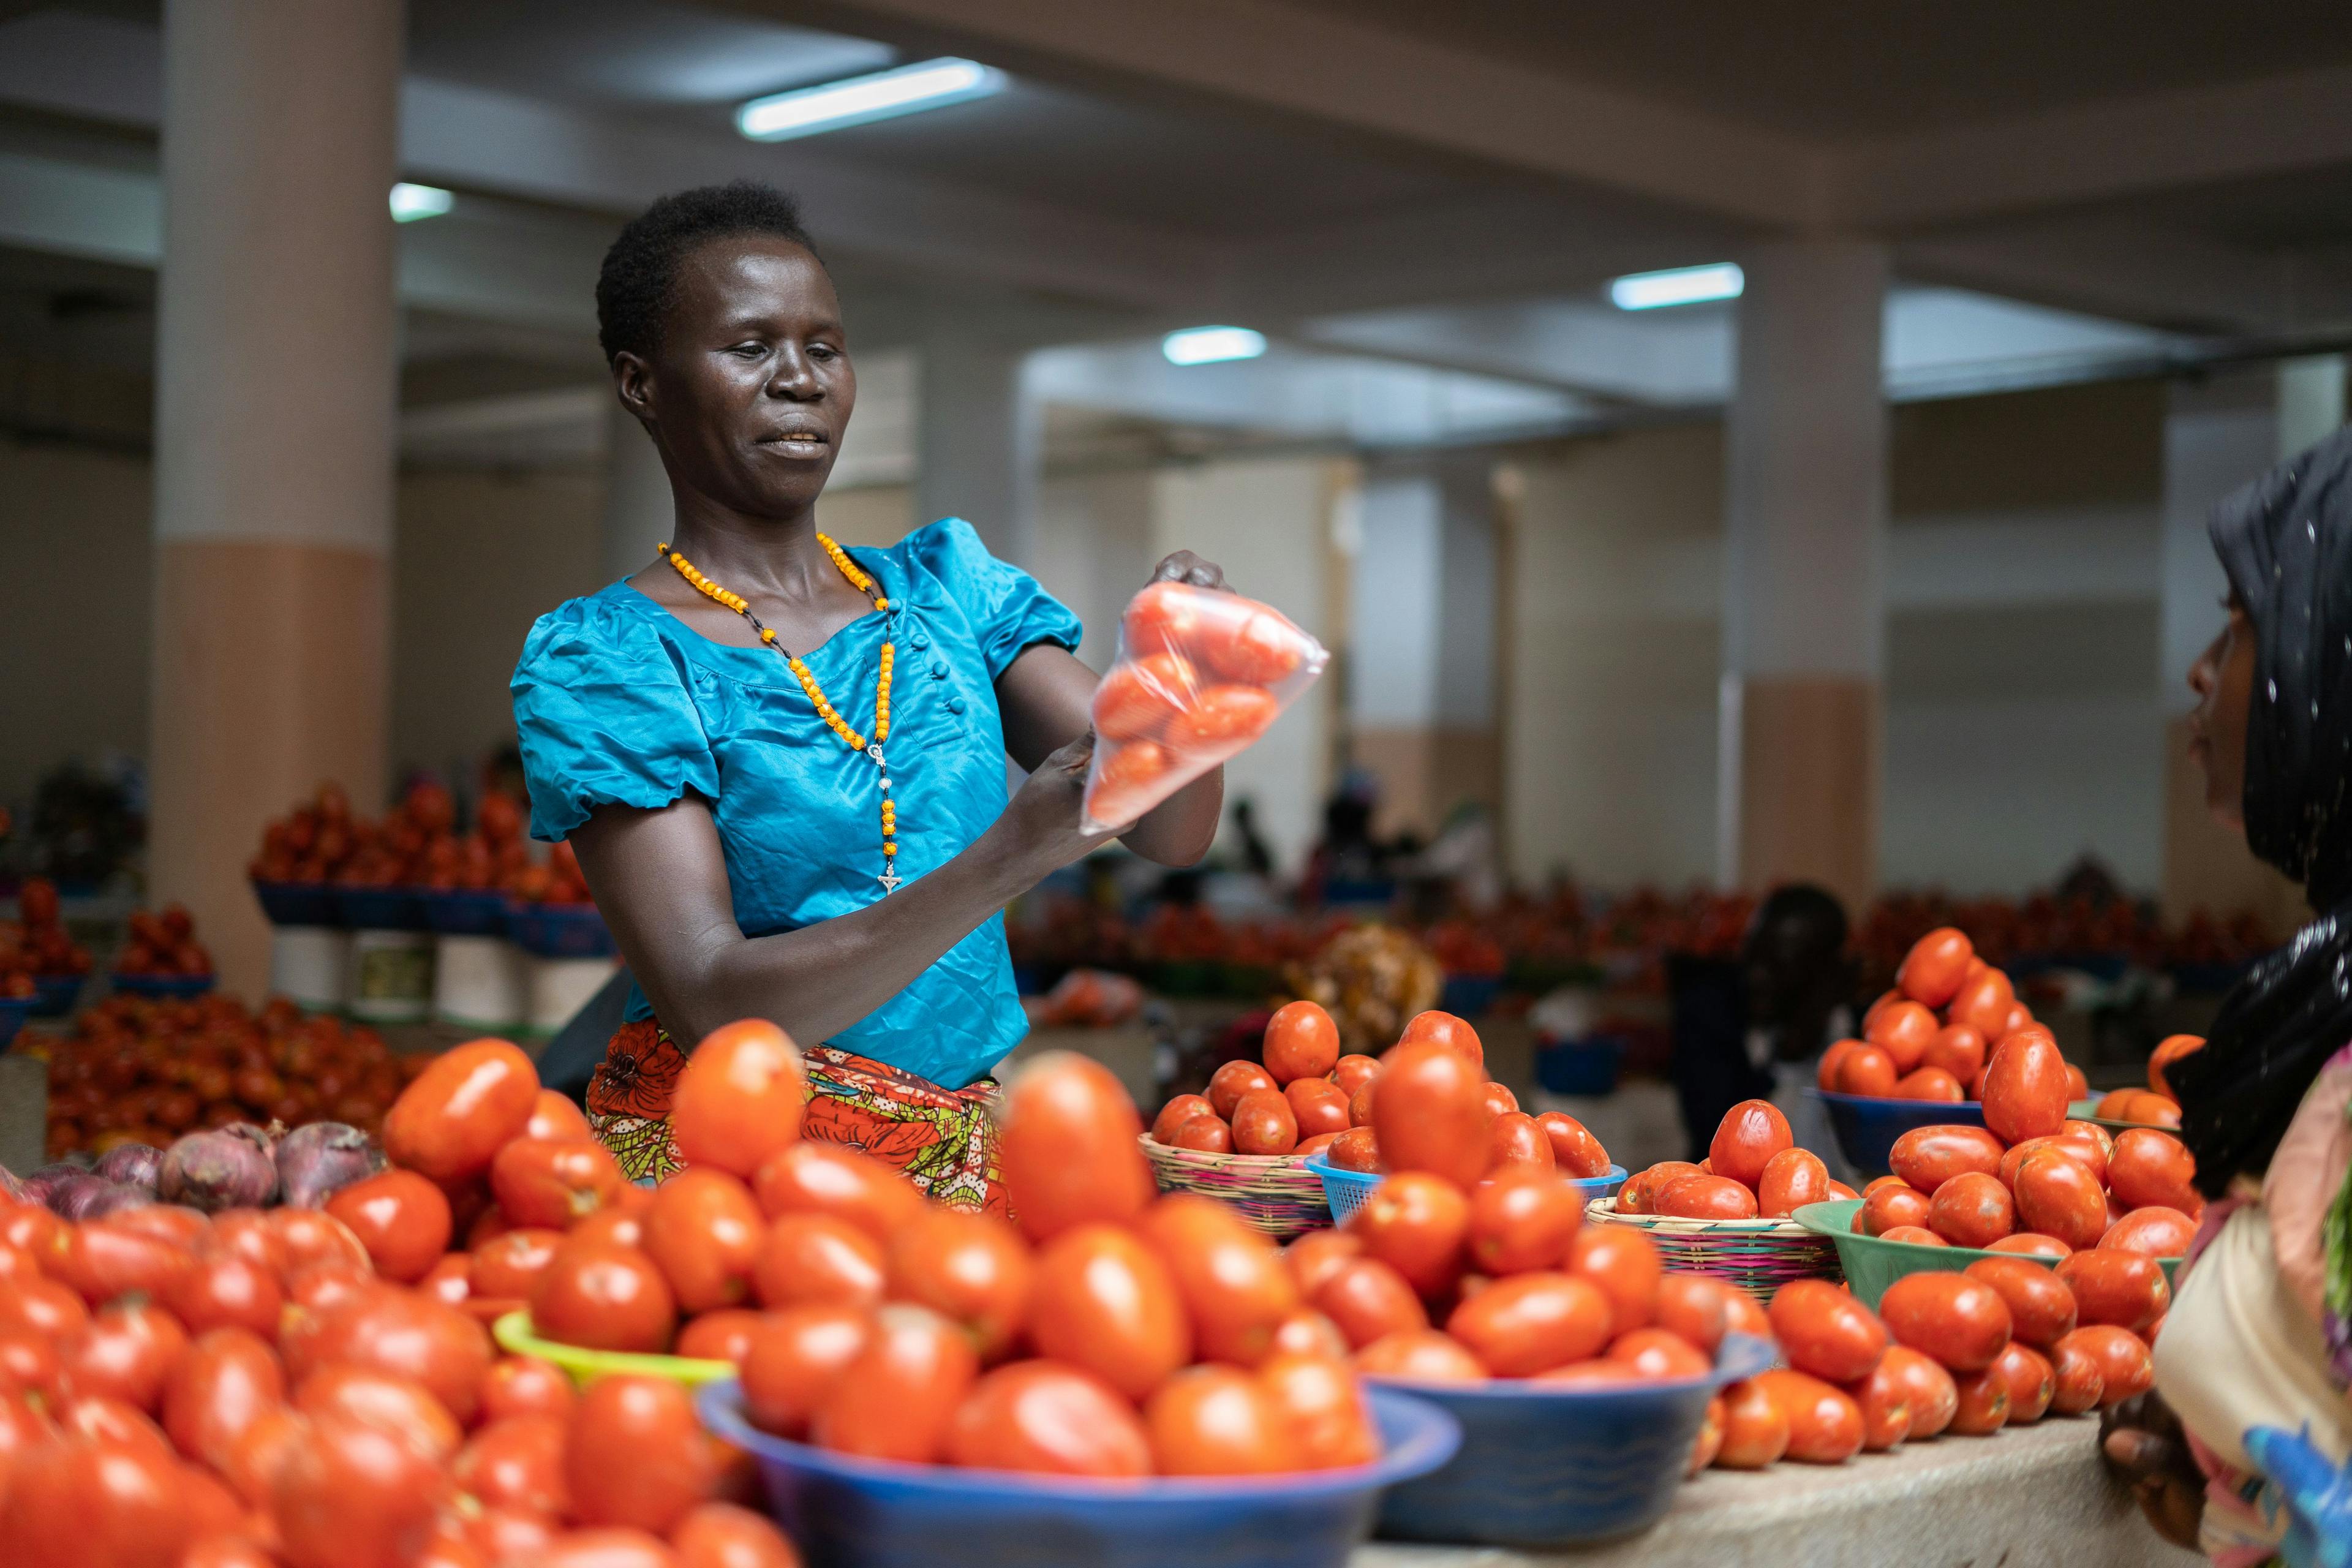 Florence Anzaru (37) moved to Arua as a girl, and has been selling fresh produce here for 22 years. Women are the muscle behind much of Africa’s informal economy and cross-border trade, yet climate impacts could hit them particularly hard.  